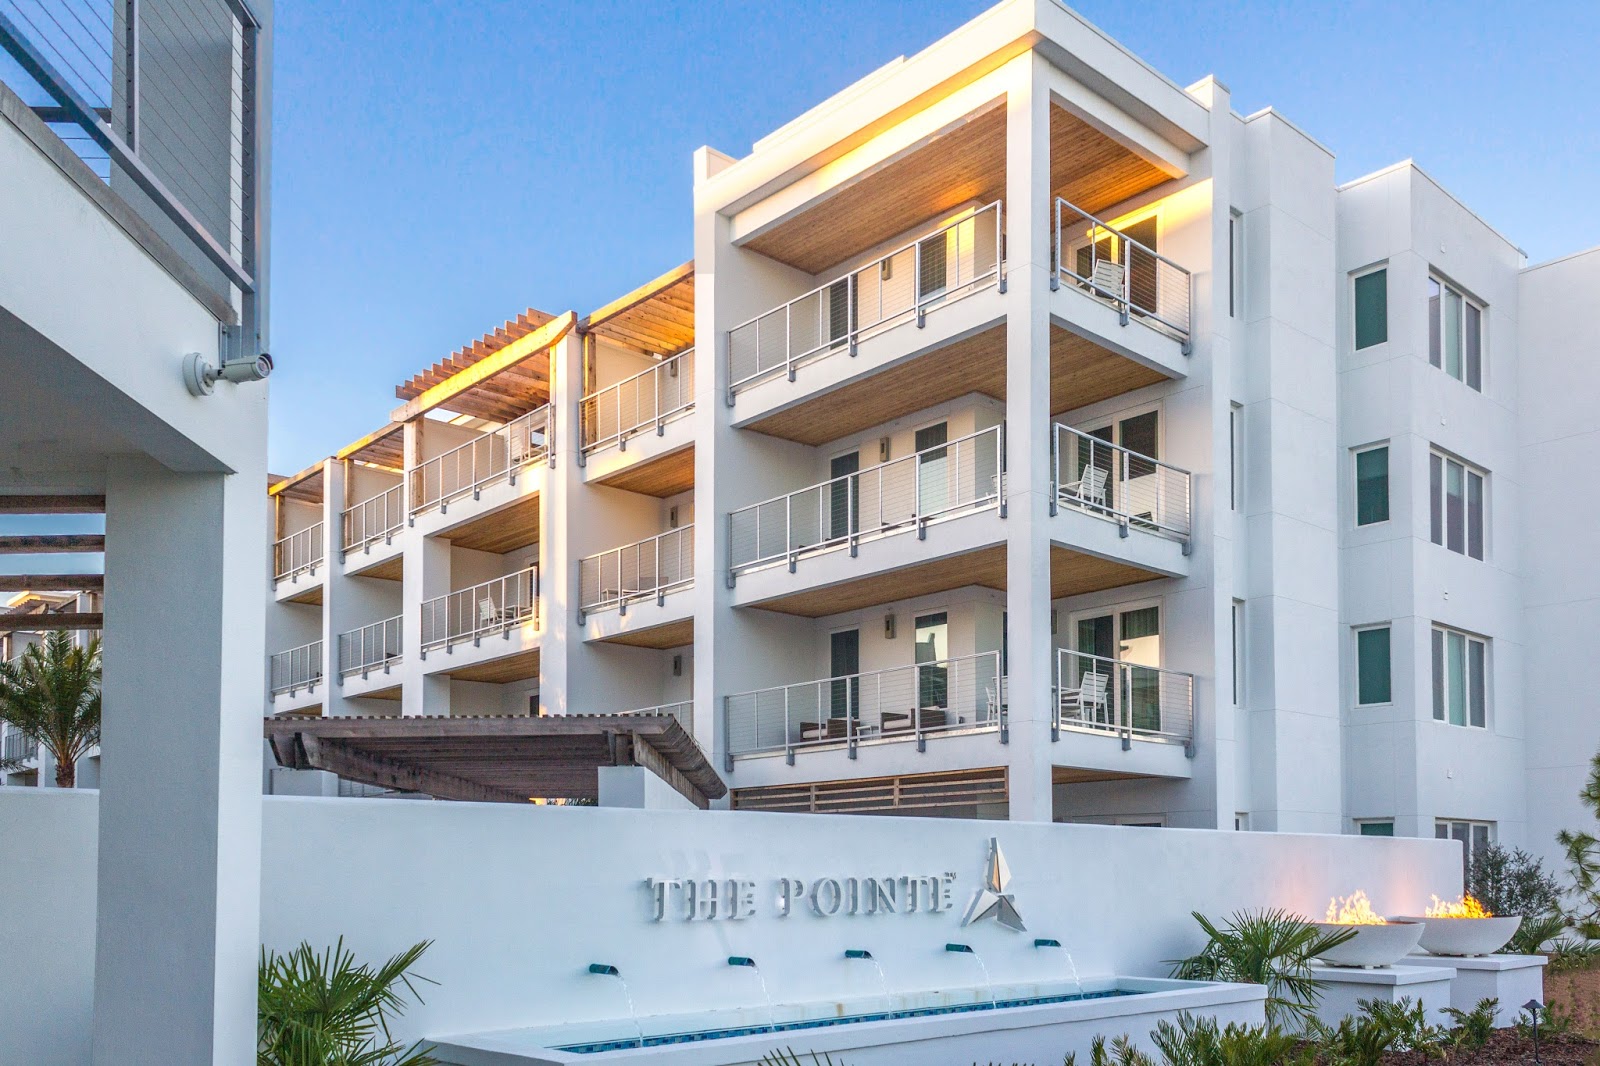 RE/MAX Beaches Blog: The Pointe on 30A